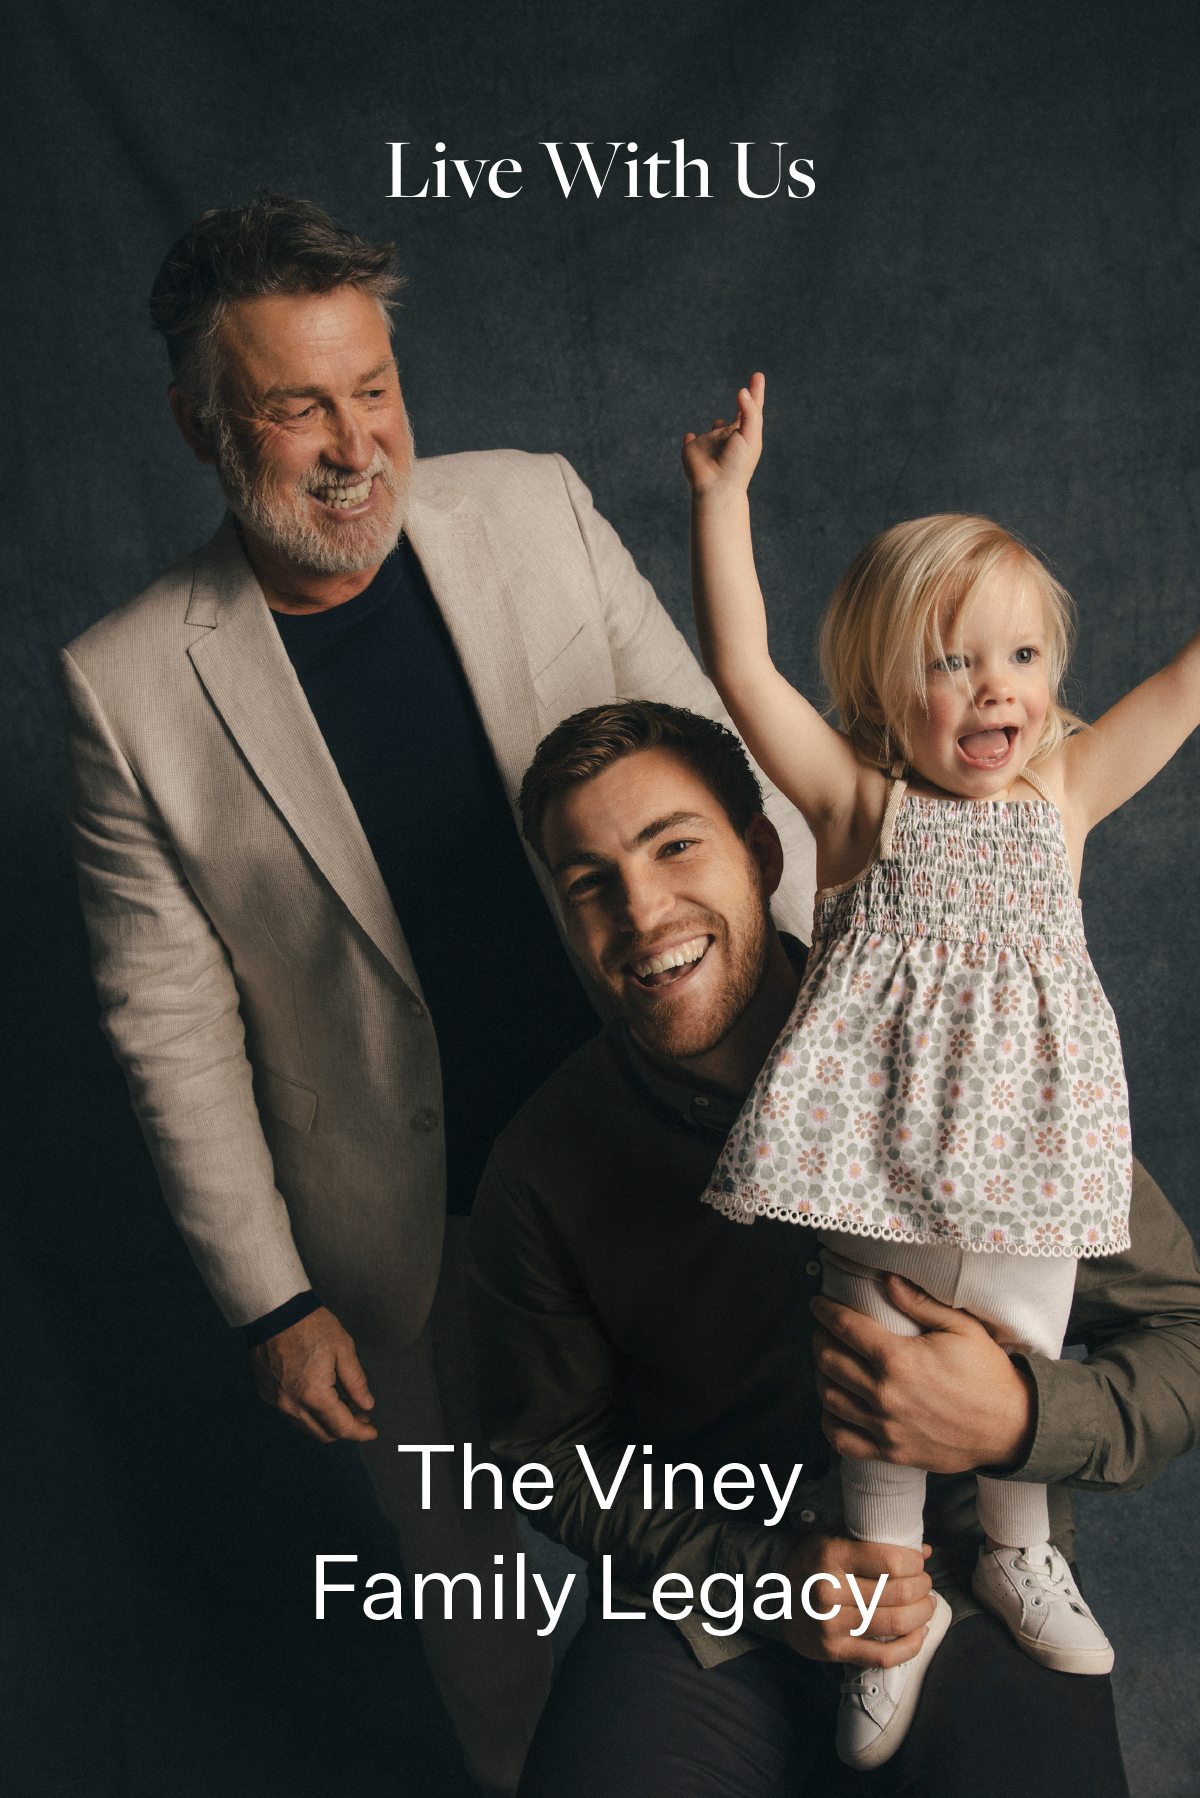 LIVE WITH US| The Viney Family Legacy